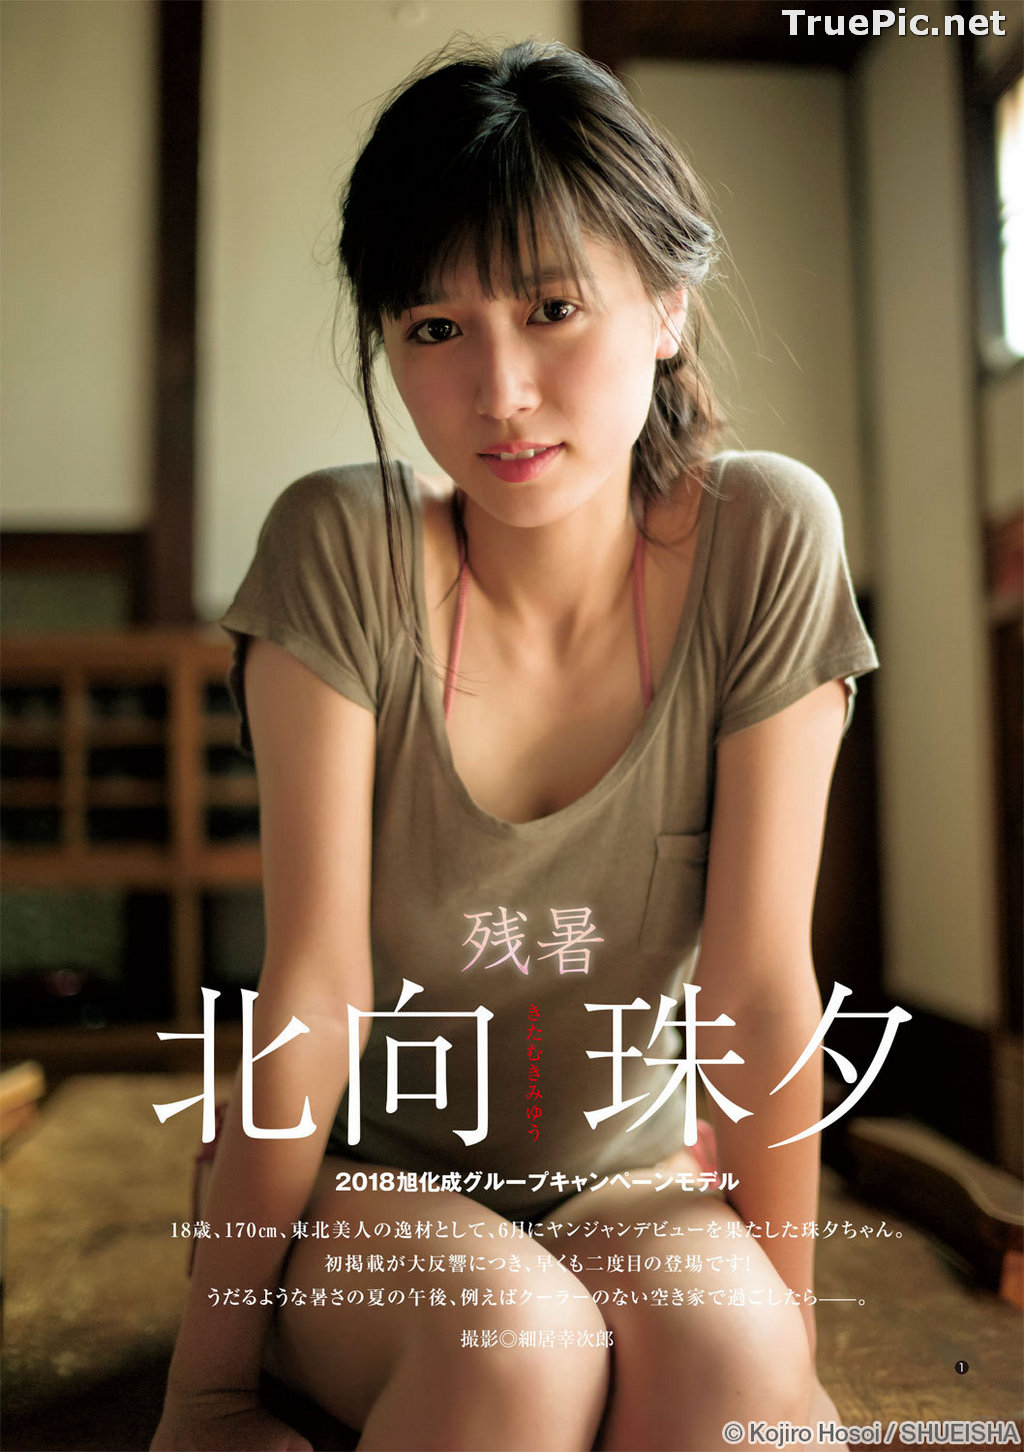 ImageJapanese Gravure Idol and Actress - Kitamuki Miyu (北向珠夕) - Sexy Picture Collection 2020 - TruePic.net - Picture-71